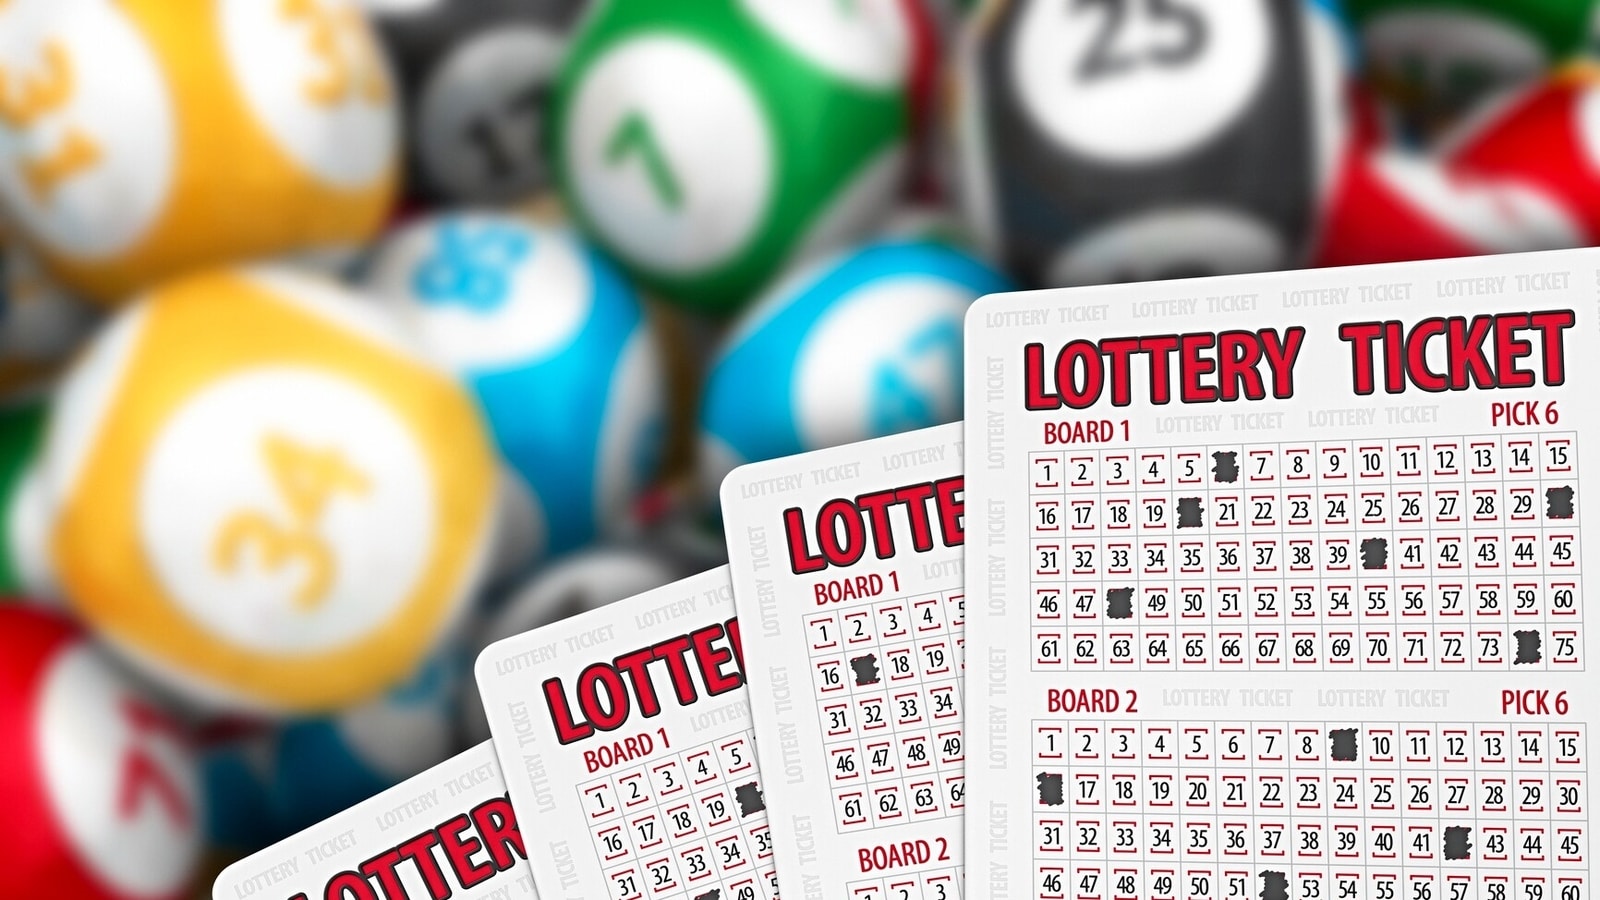 Winning the Lottery Togel: A Game of Skill or Pure Chance?